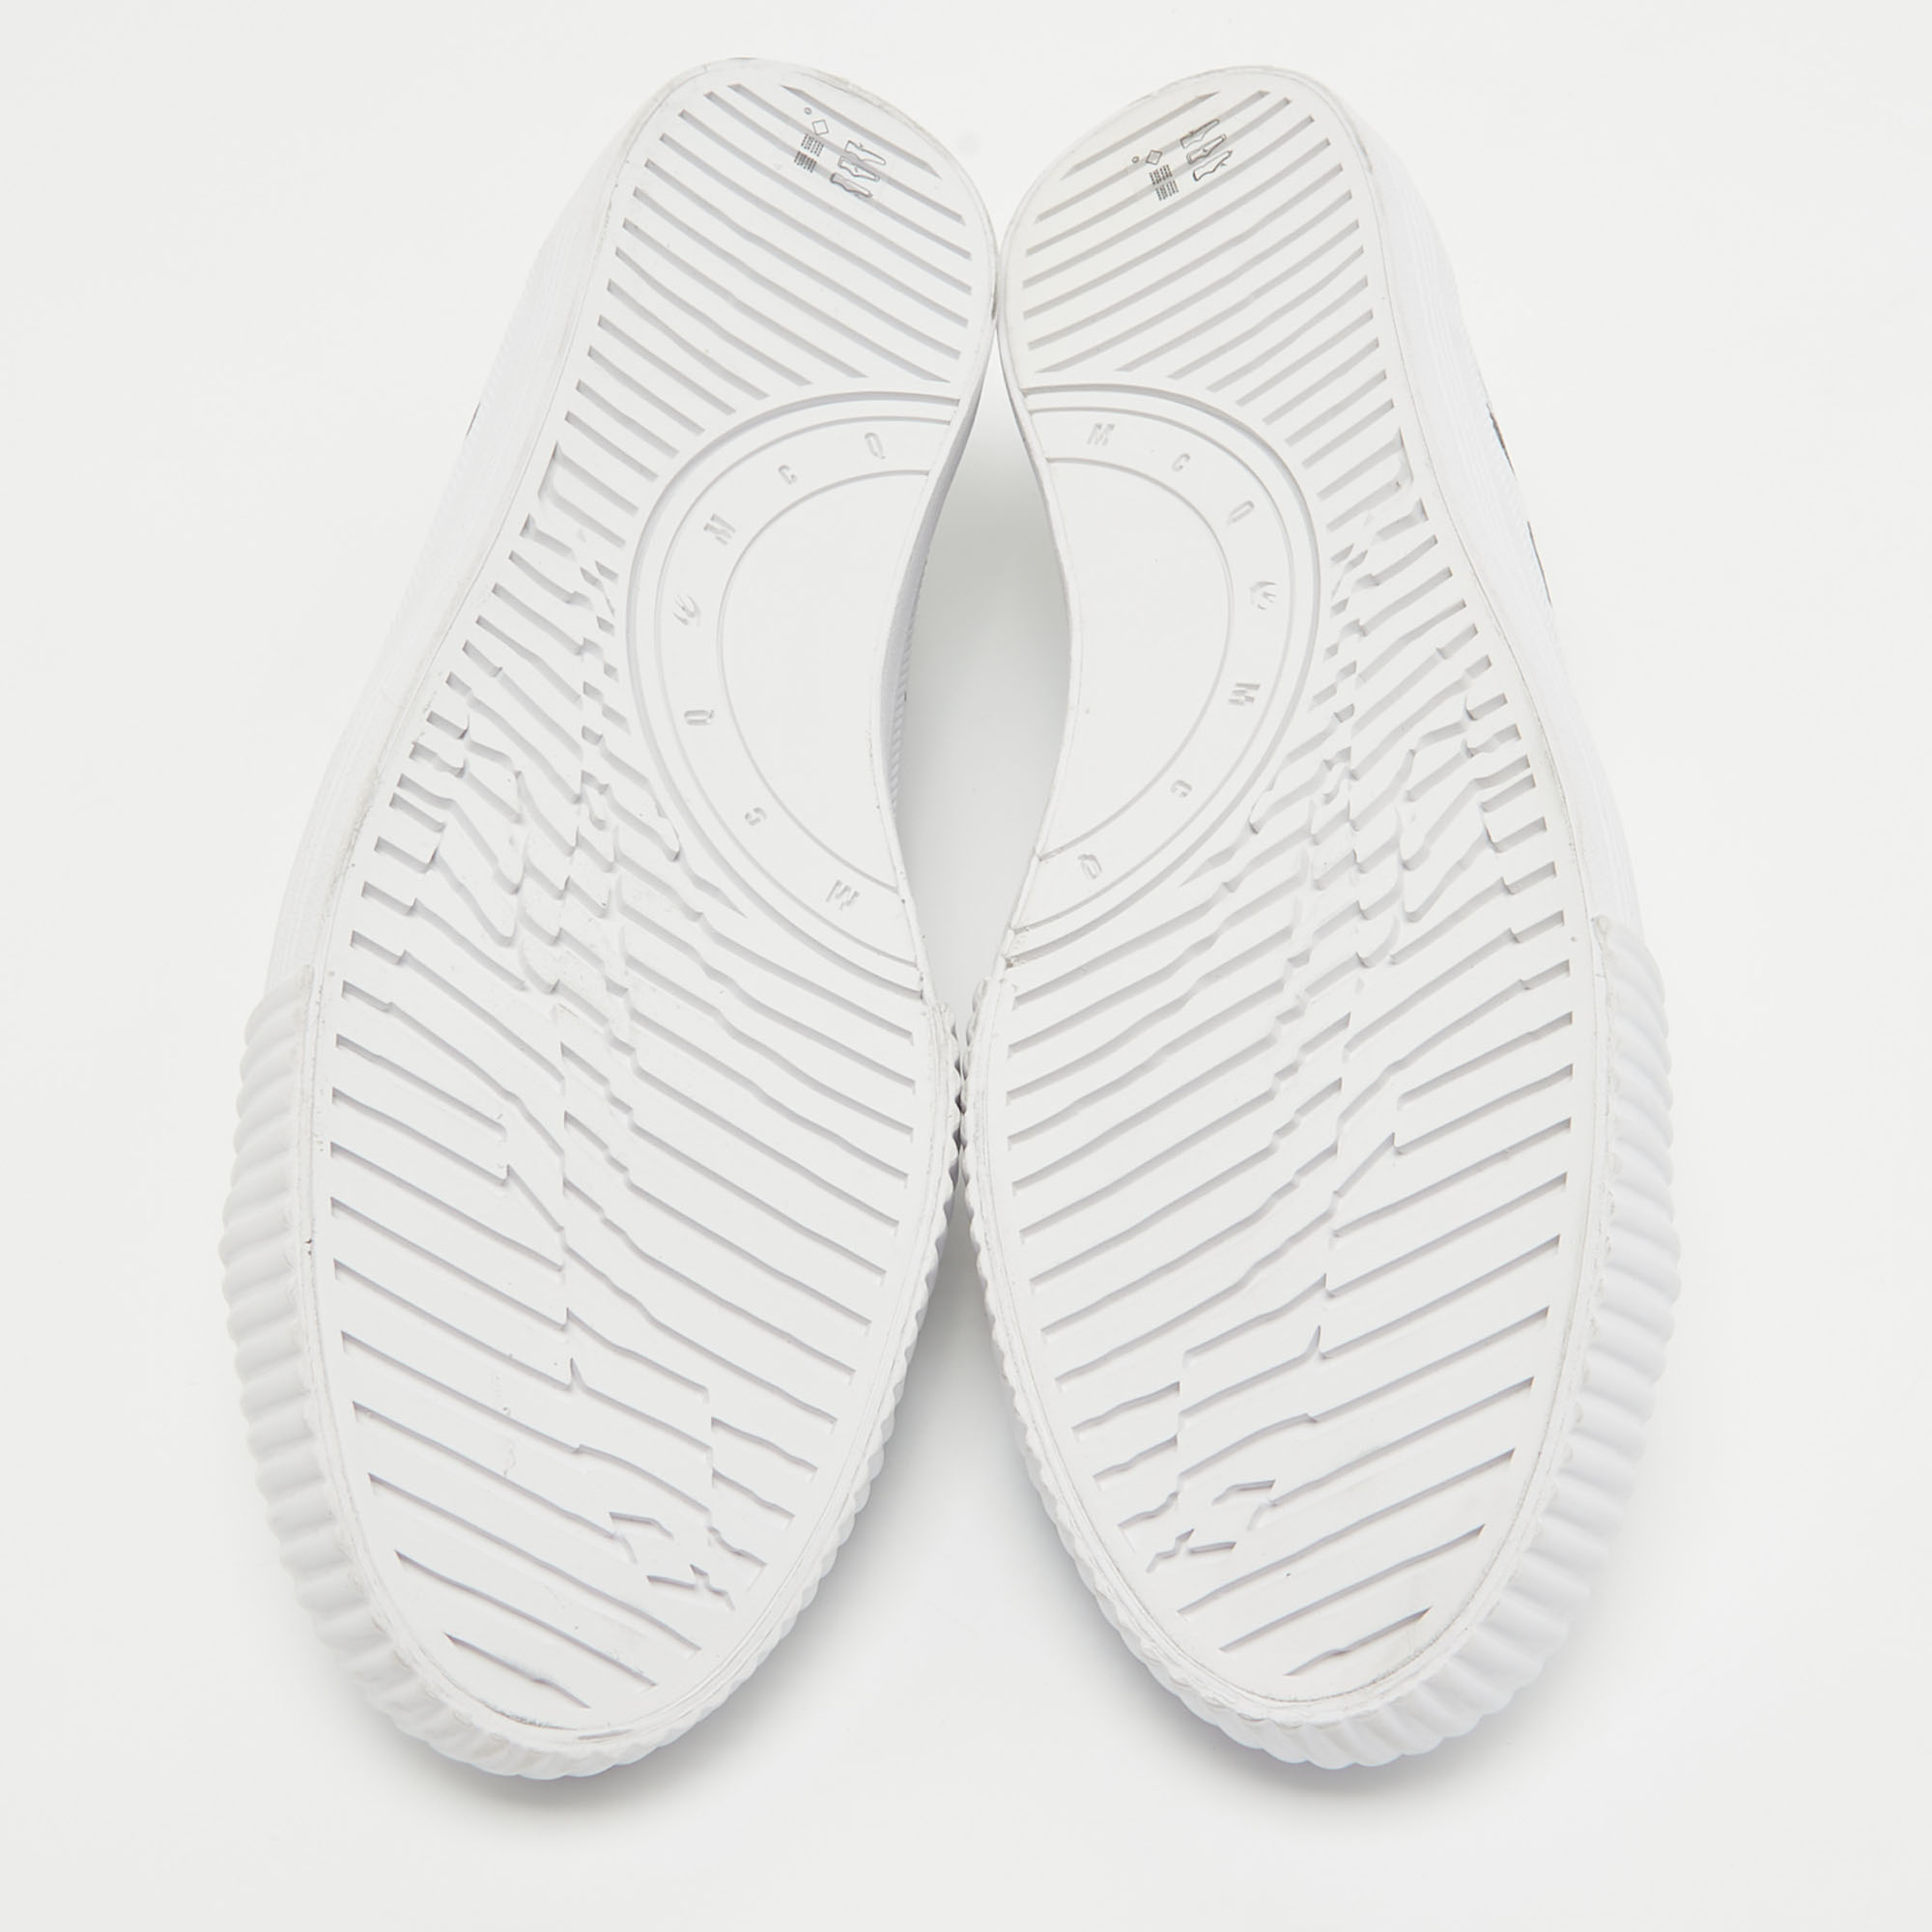 McQ By Alexander McQueen White Canvas Swallow Sneakers Size 44